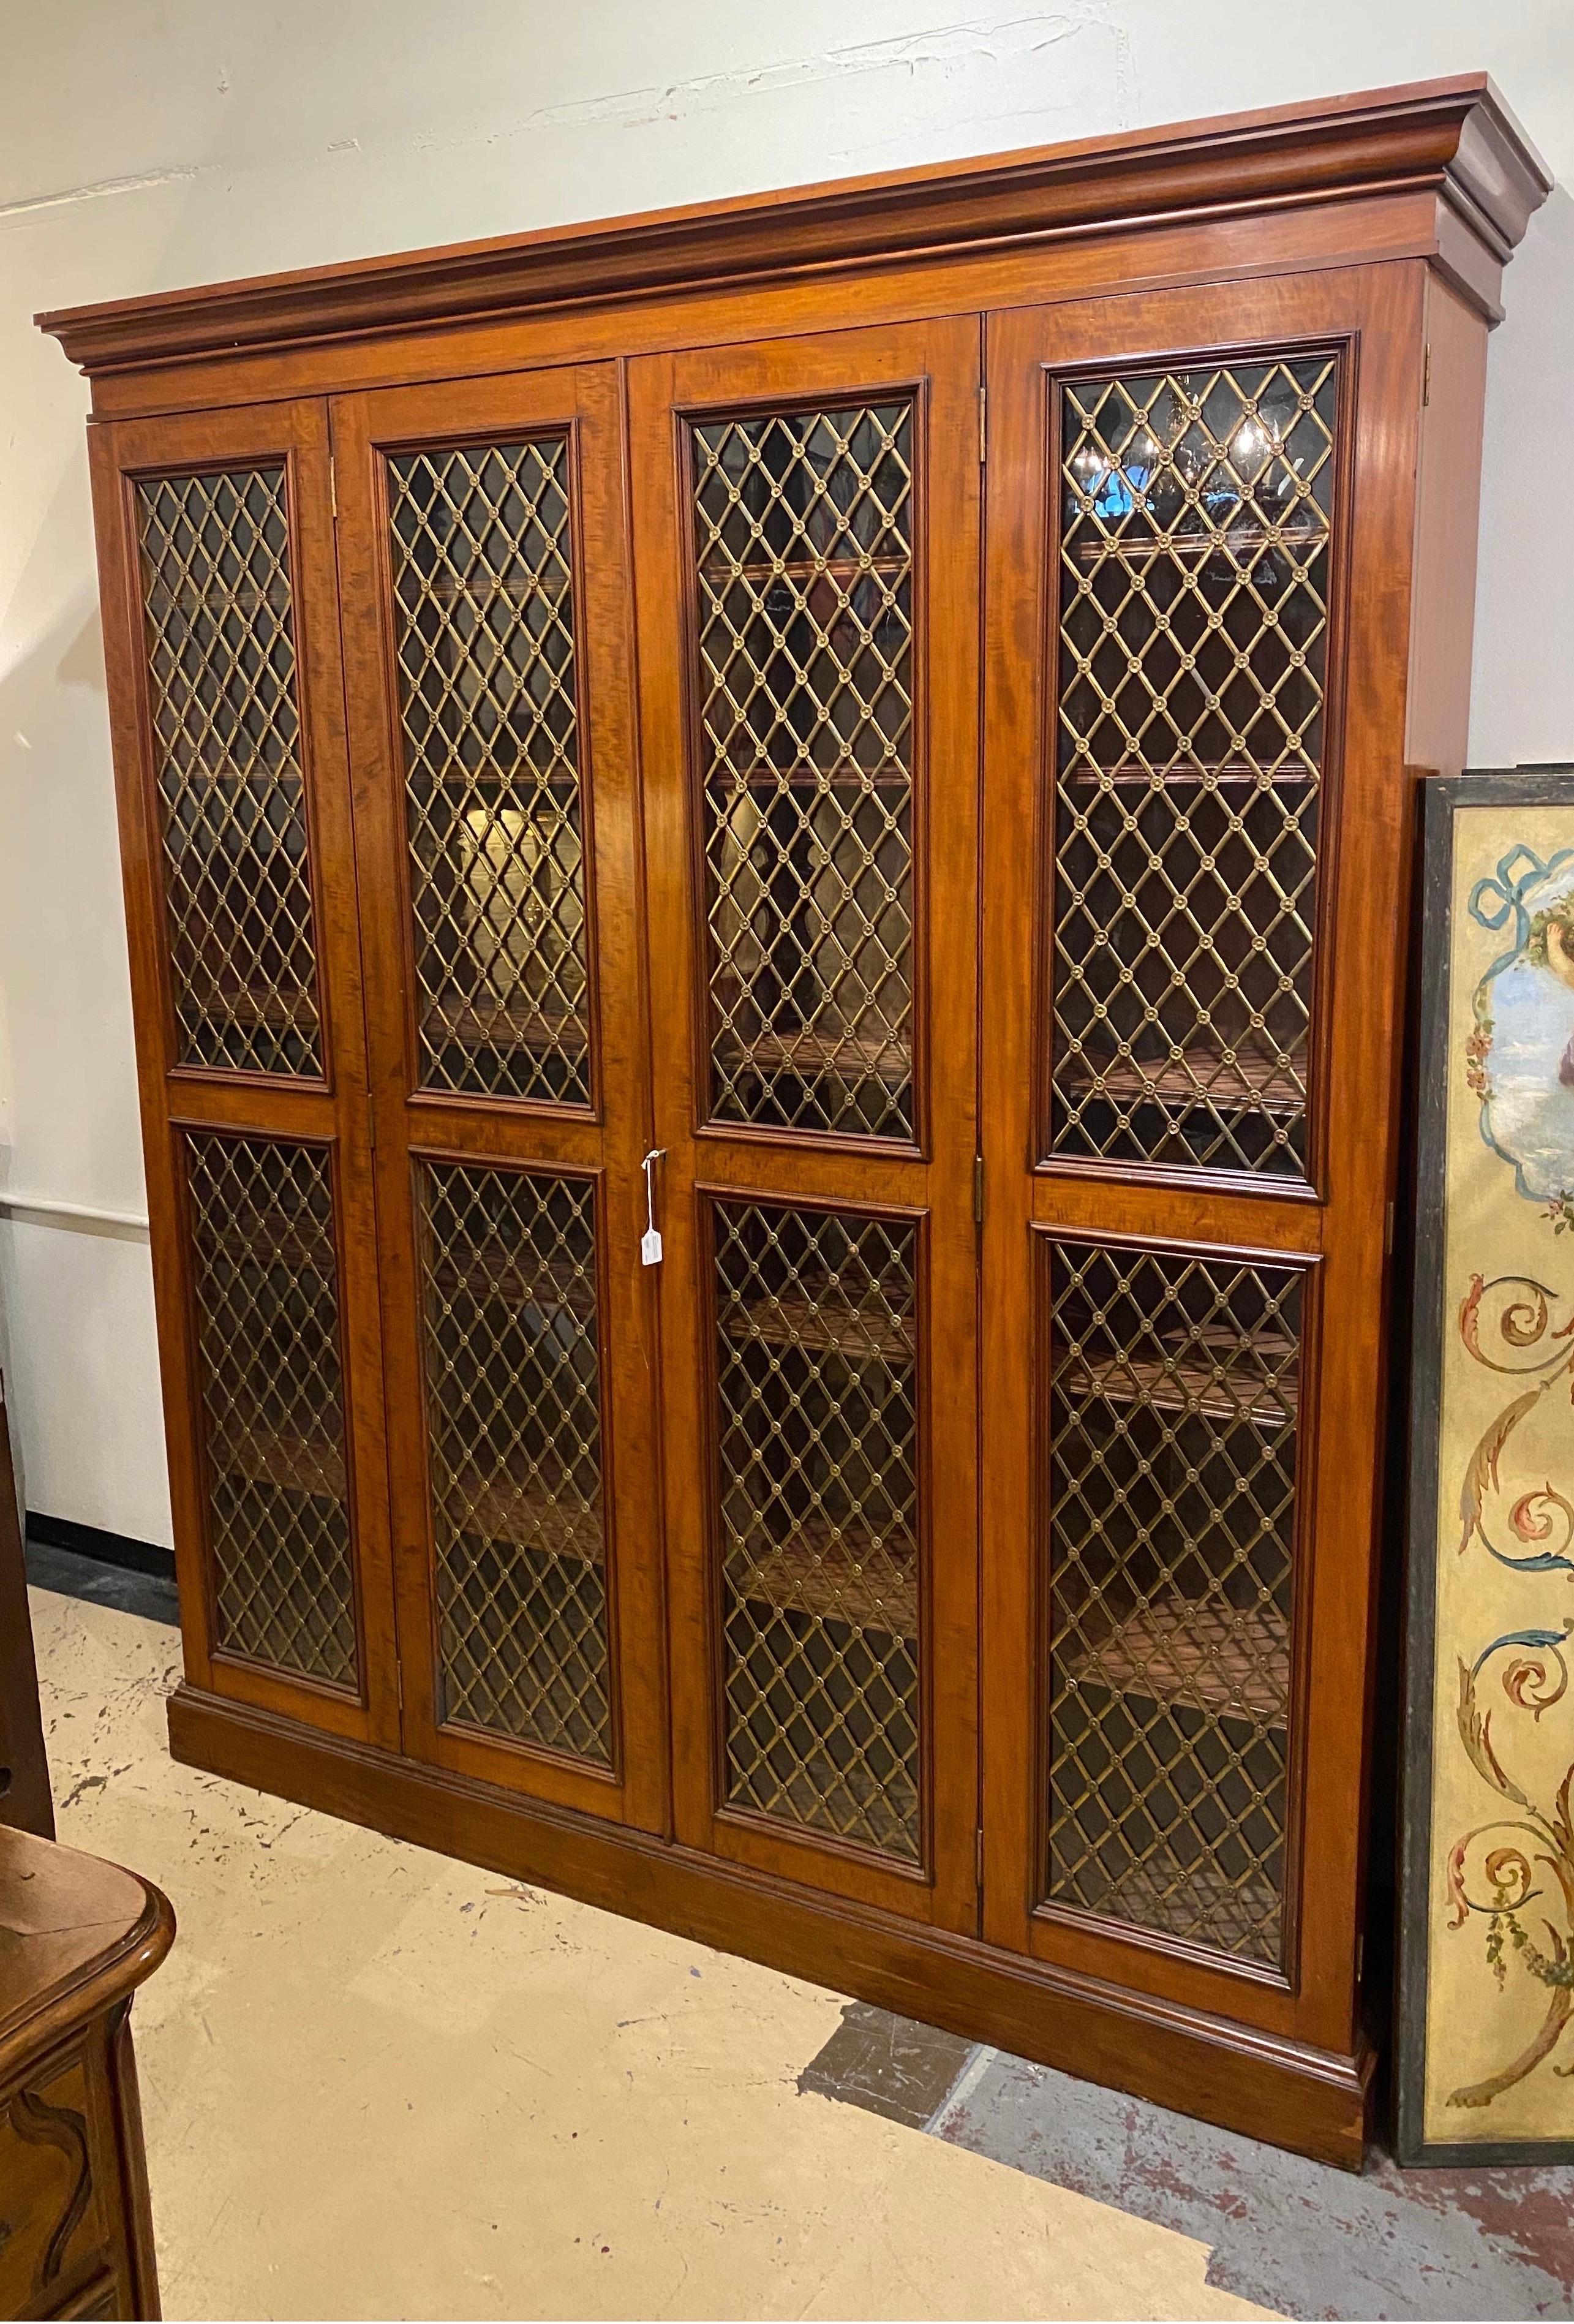 Great 19th century English regency bookcase or gun case with double folding doors and adjustable shelves. The bookcase is set on a plinth base and has 4 doors that fold outwards. The shelves are fully removable and could easily be altered to support